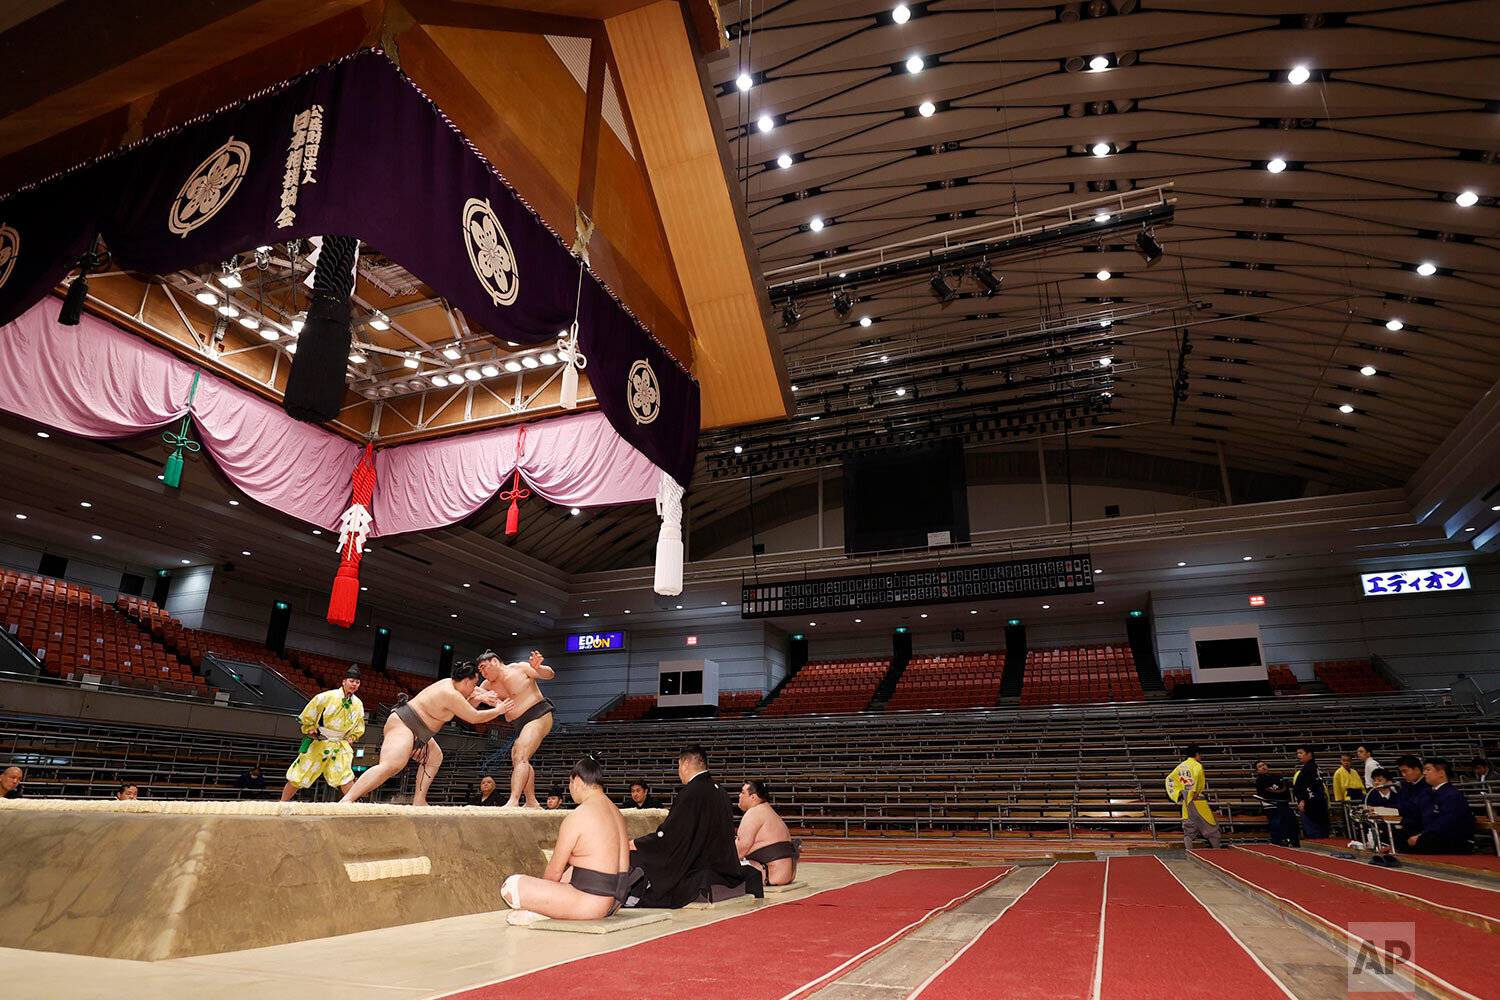  Sumo wrestlers fight on the ring as spectators' seats are empty during the Spring Grand Sumo Tournament in Osaka, western Japan, Sunday, March 8, 2020. (Kyodo News via AP) 